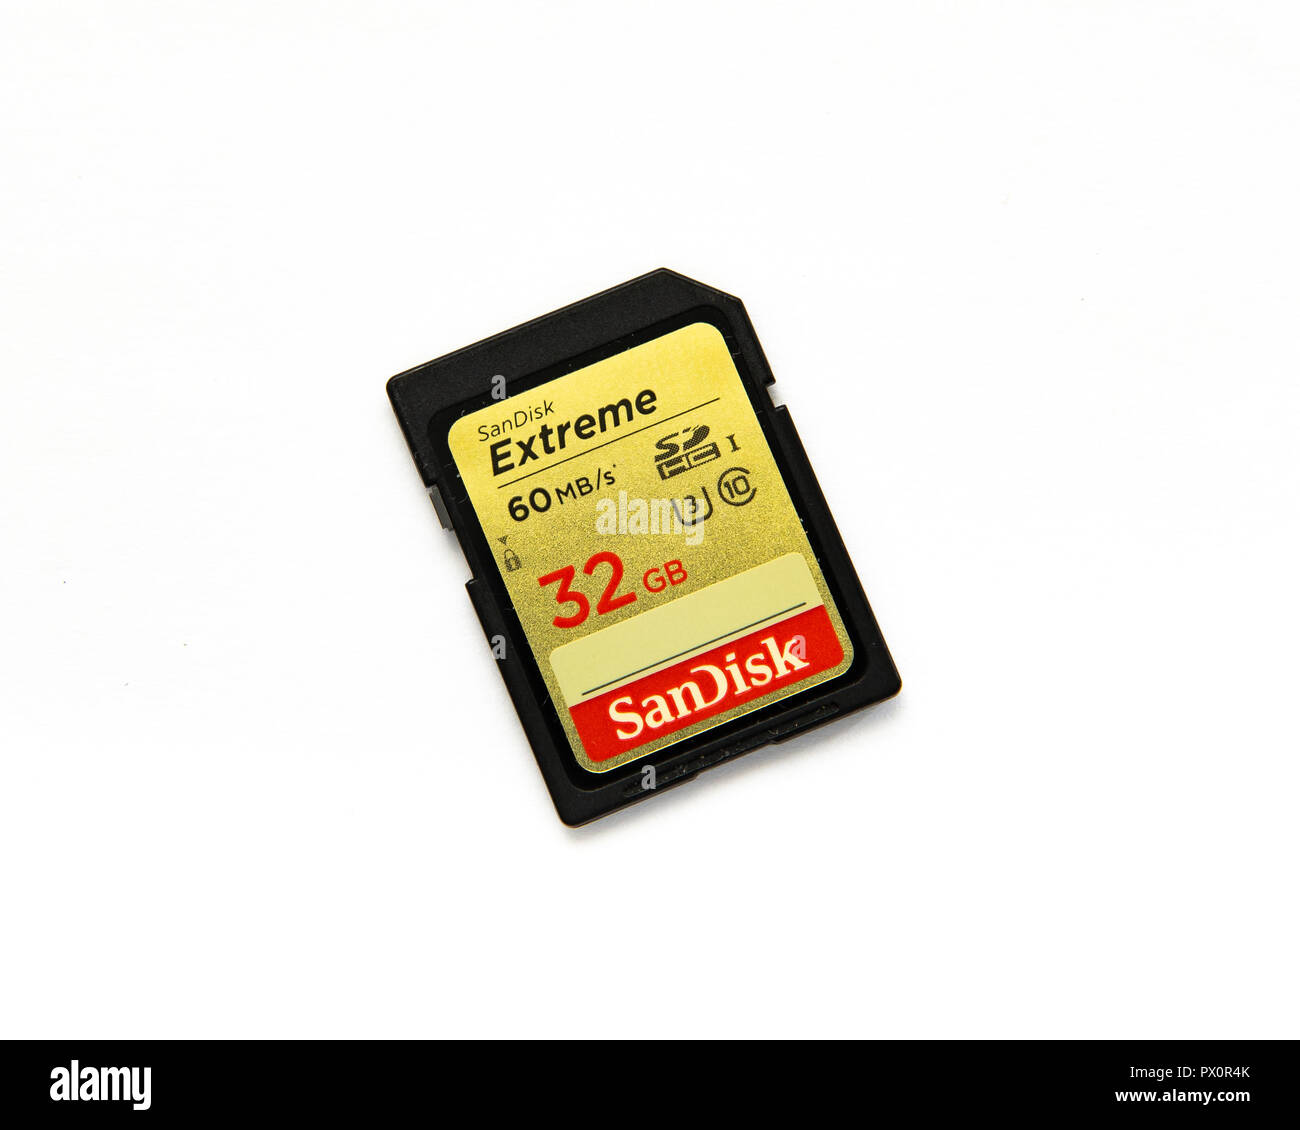 A SanDisk Extreme 32GB SDXC UHS-I Memory Card isolated on white a shock-proof, temperature-proof, waterproof, and x-ray-proof data storage card. Stock Photo